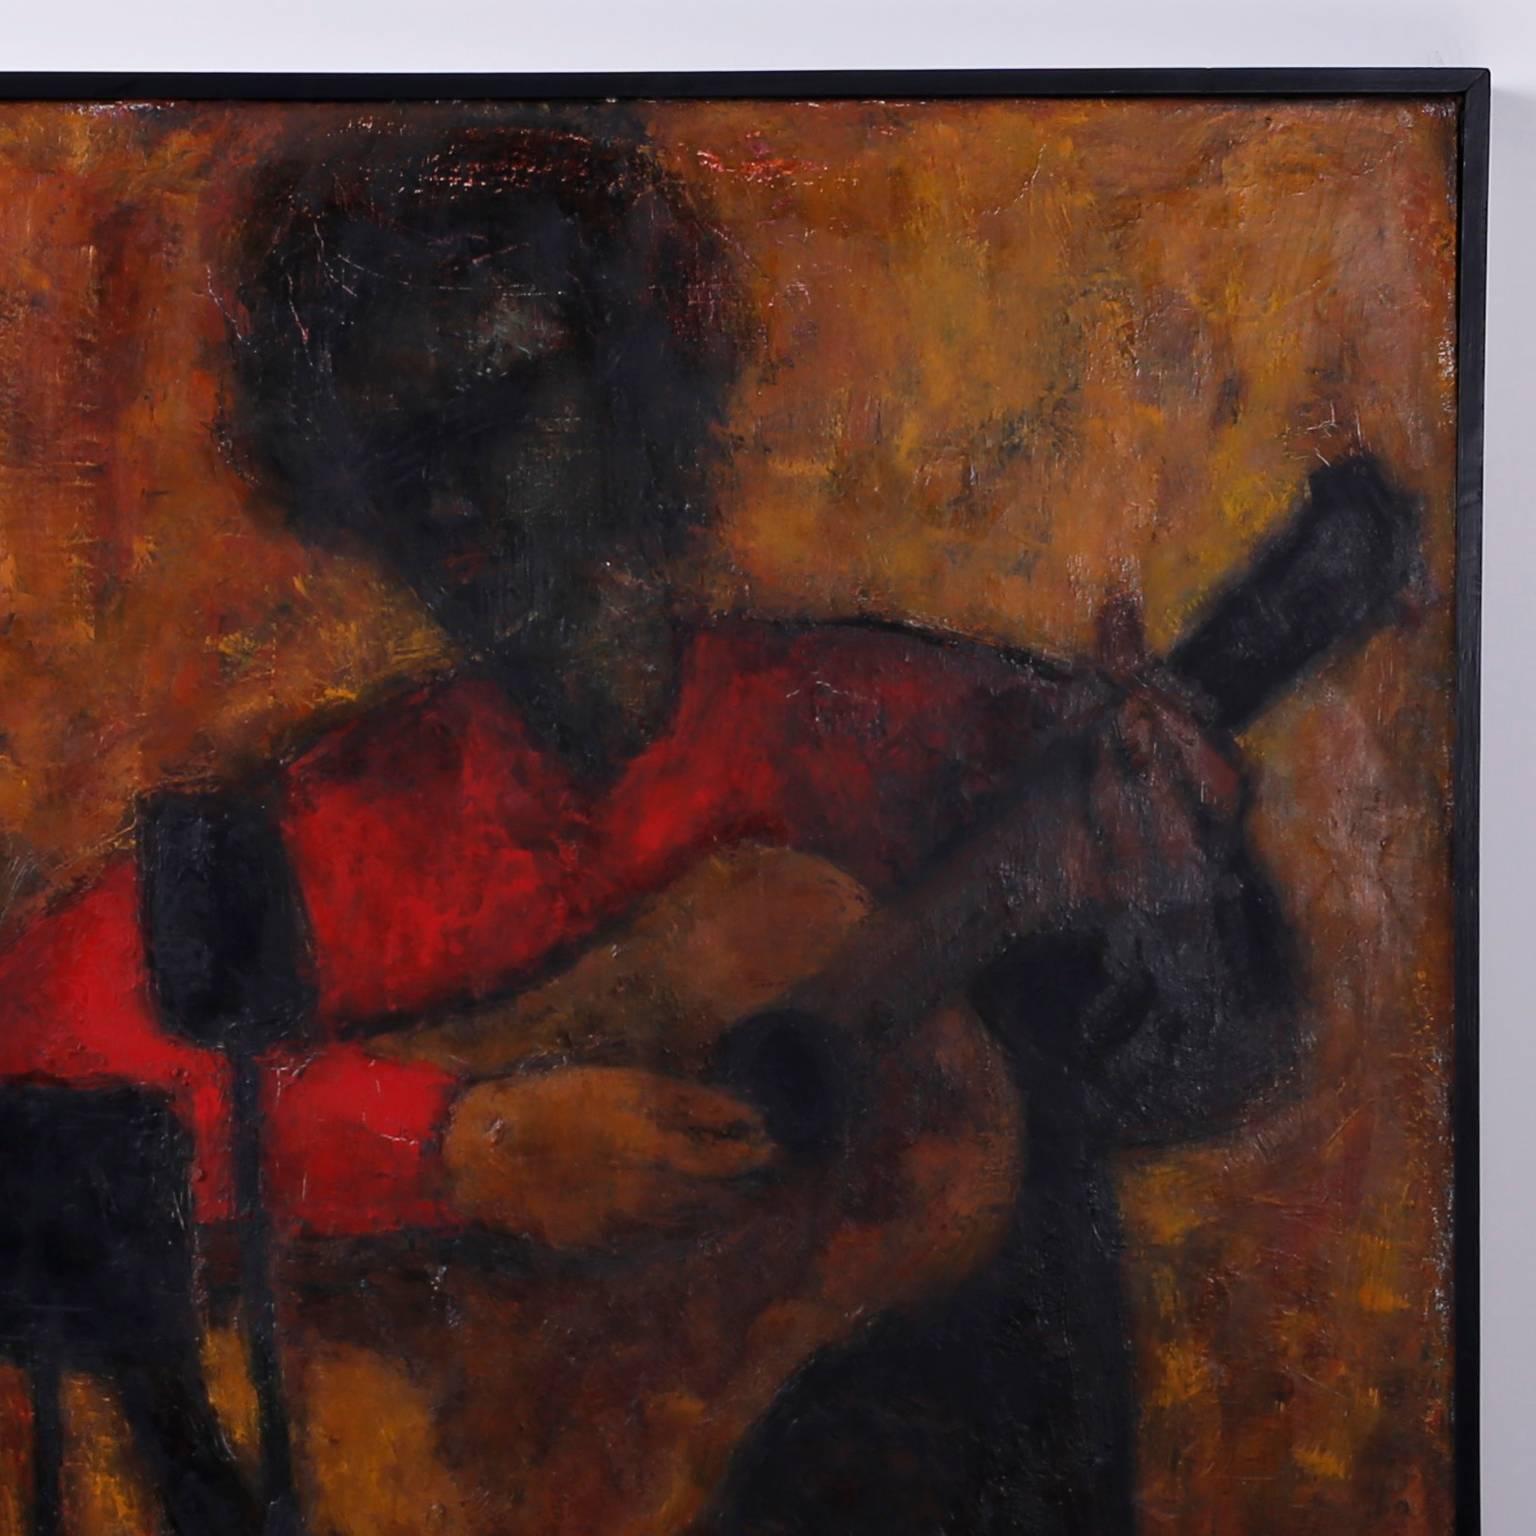 Mysterious, dreamy painting on canvas of three musicians playing a mandolin, a banjo, and a guitar. Painted with a powerful palette that suggests a passionate involvement with the music. Signed sideways in the lower right Dushsnen Juin 1964.